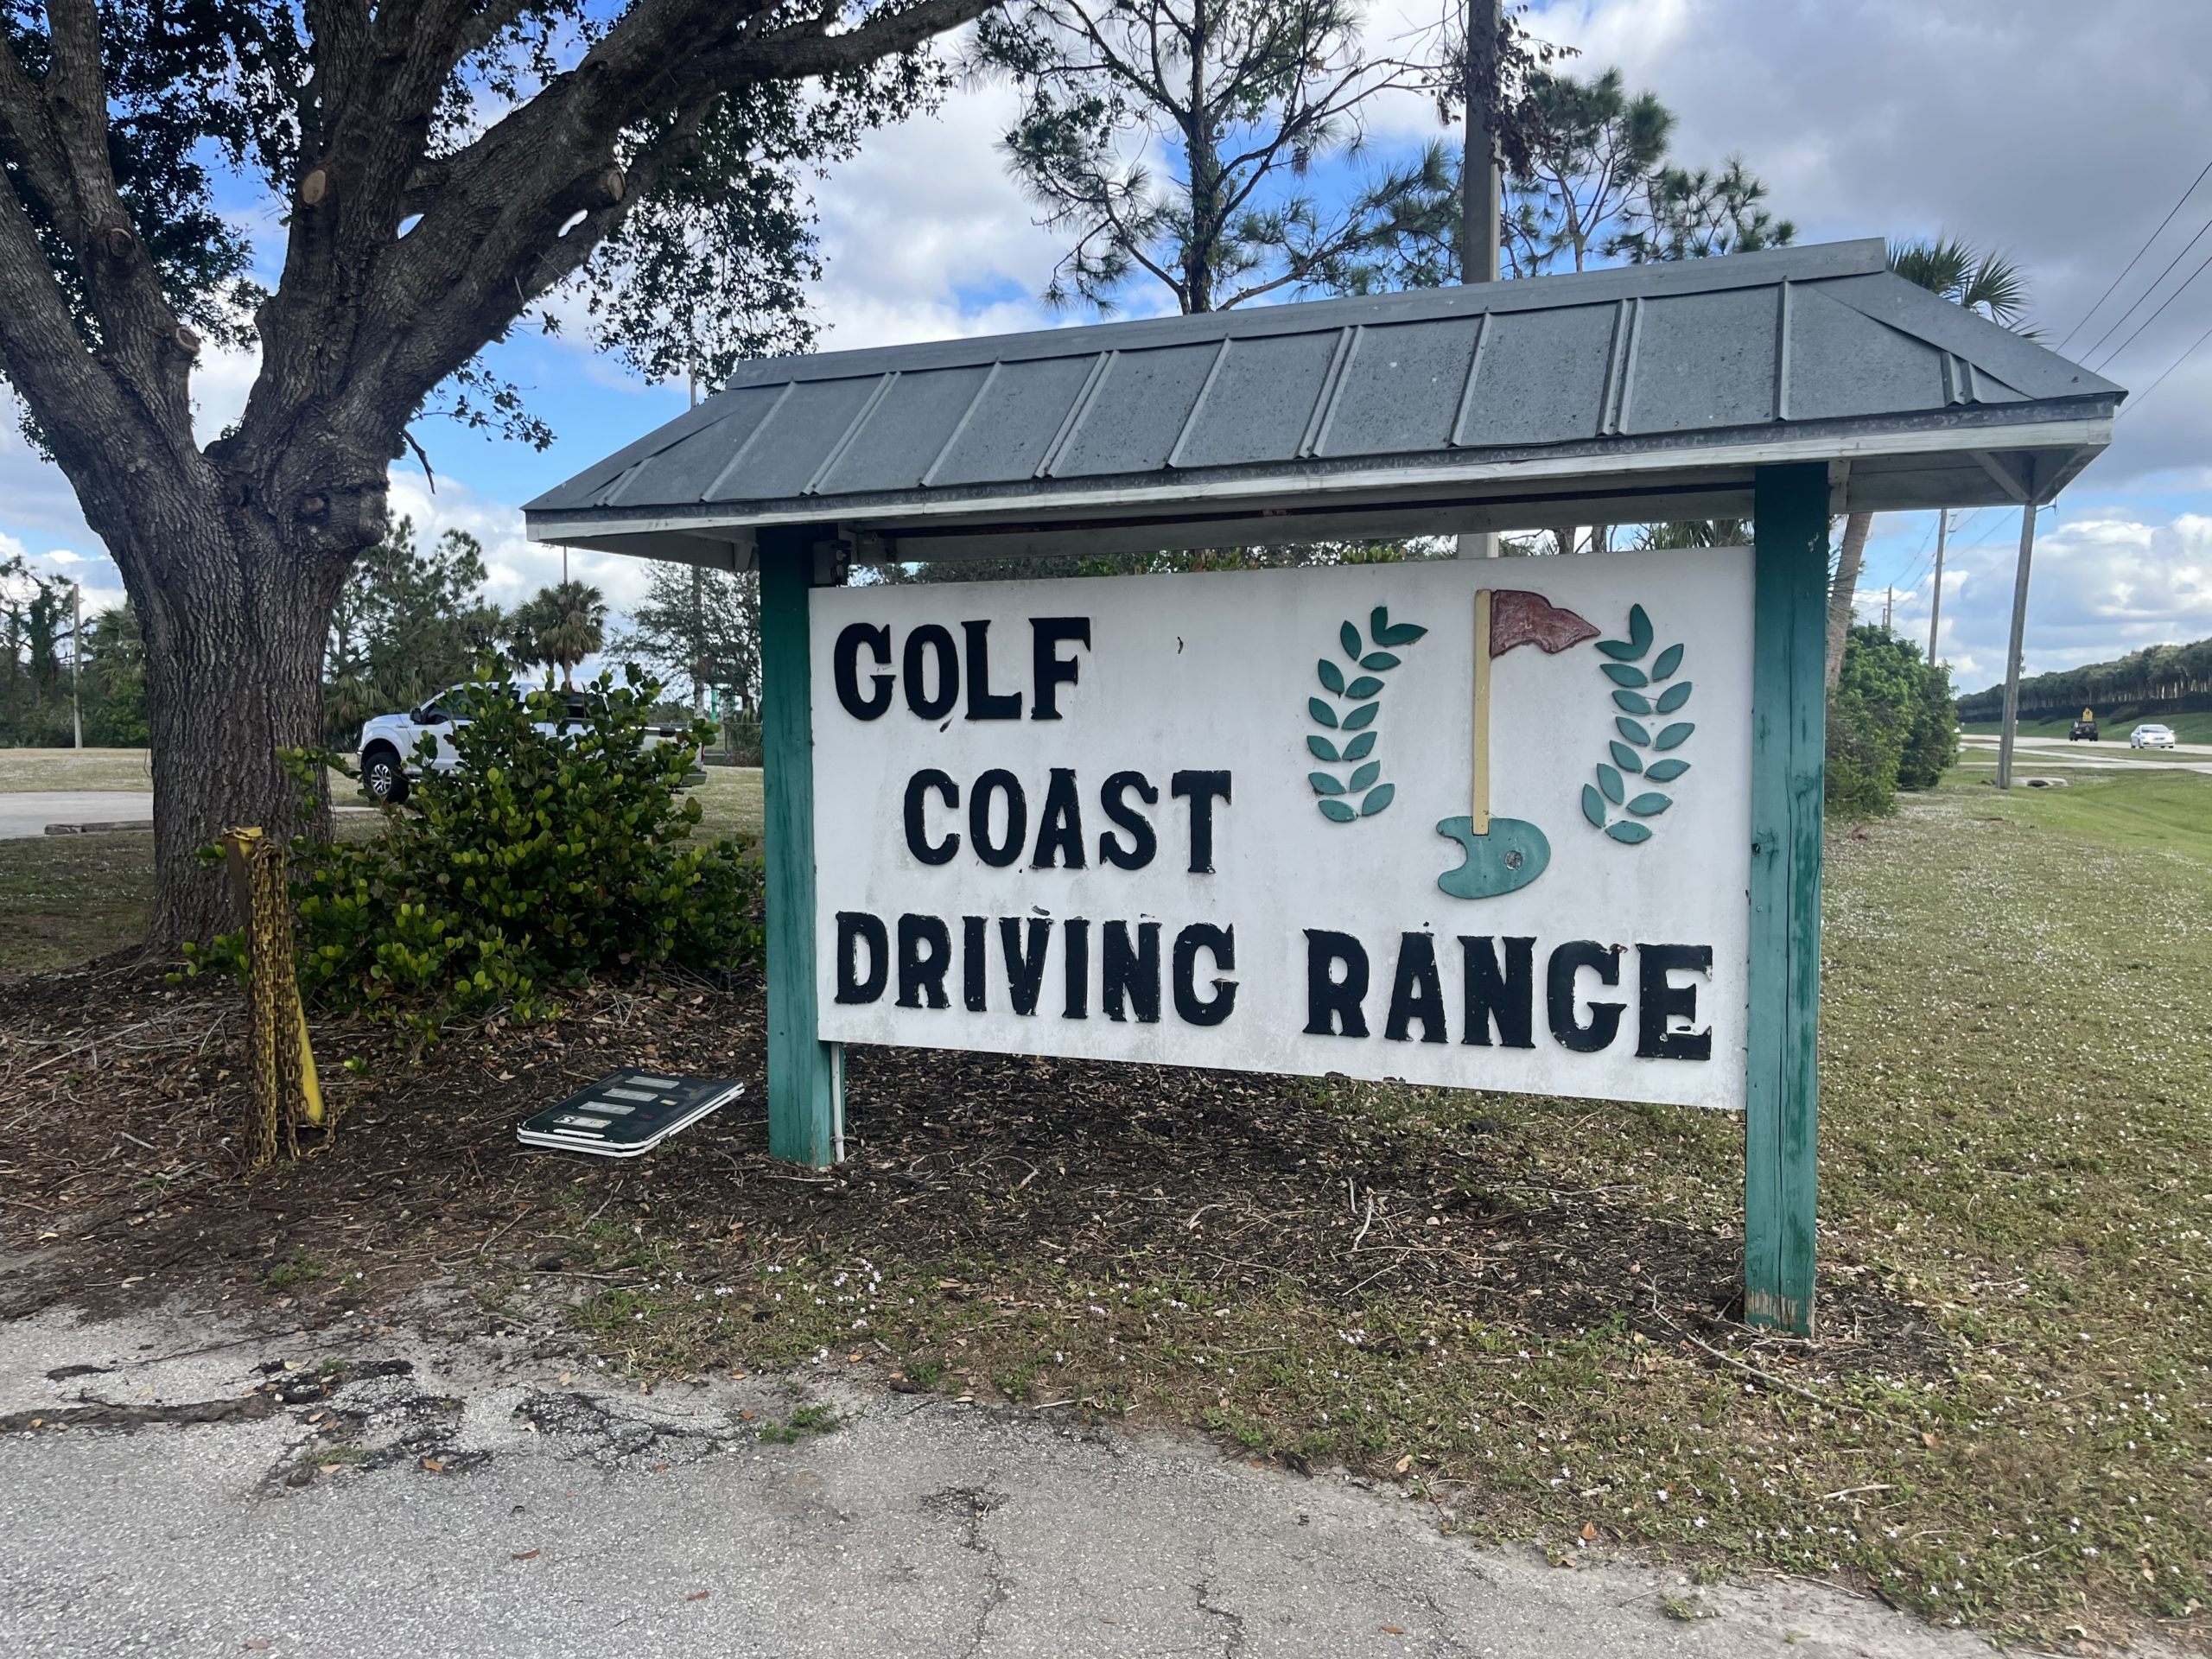 Golf Coast Driving Range is slated to become part of an entertainment complex